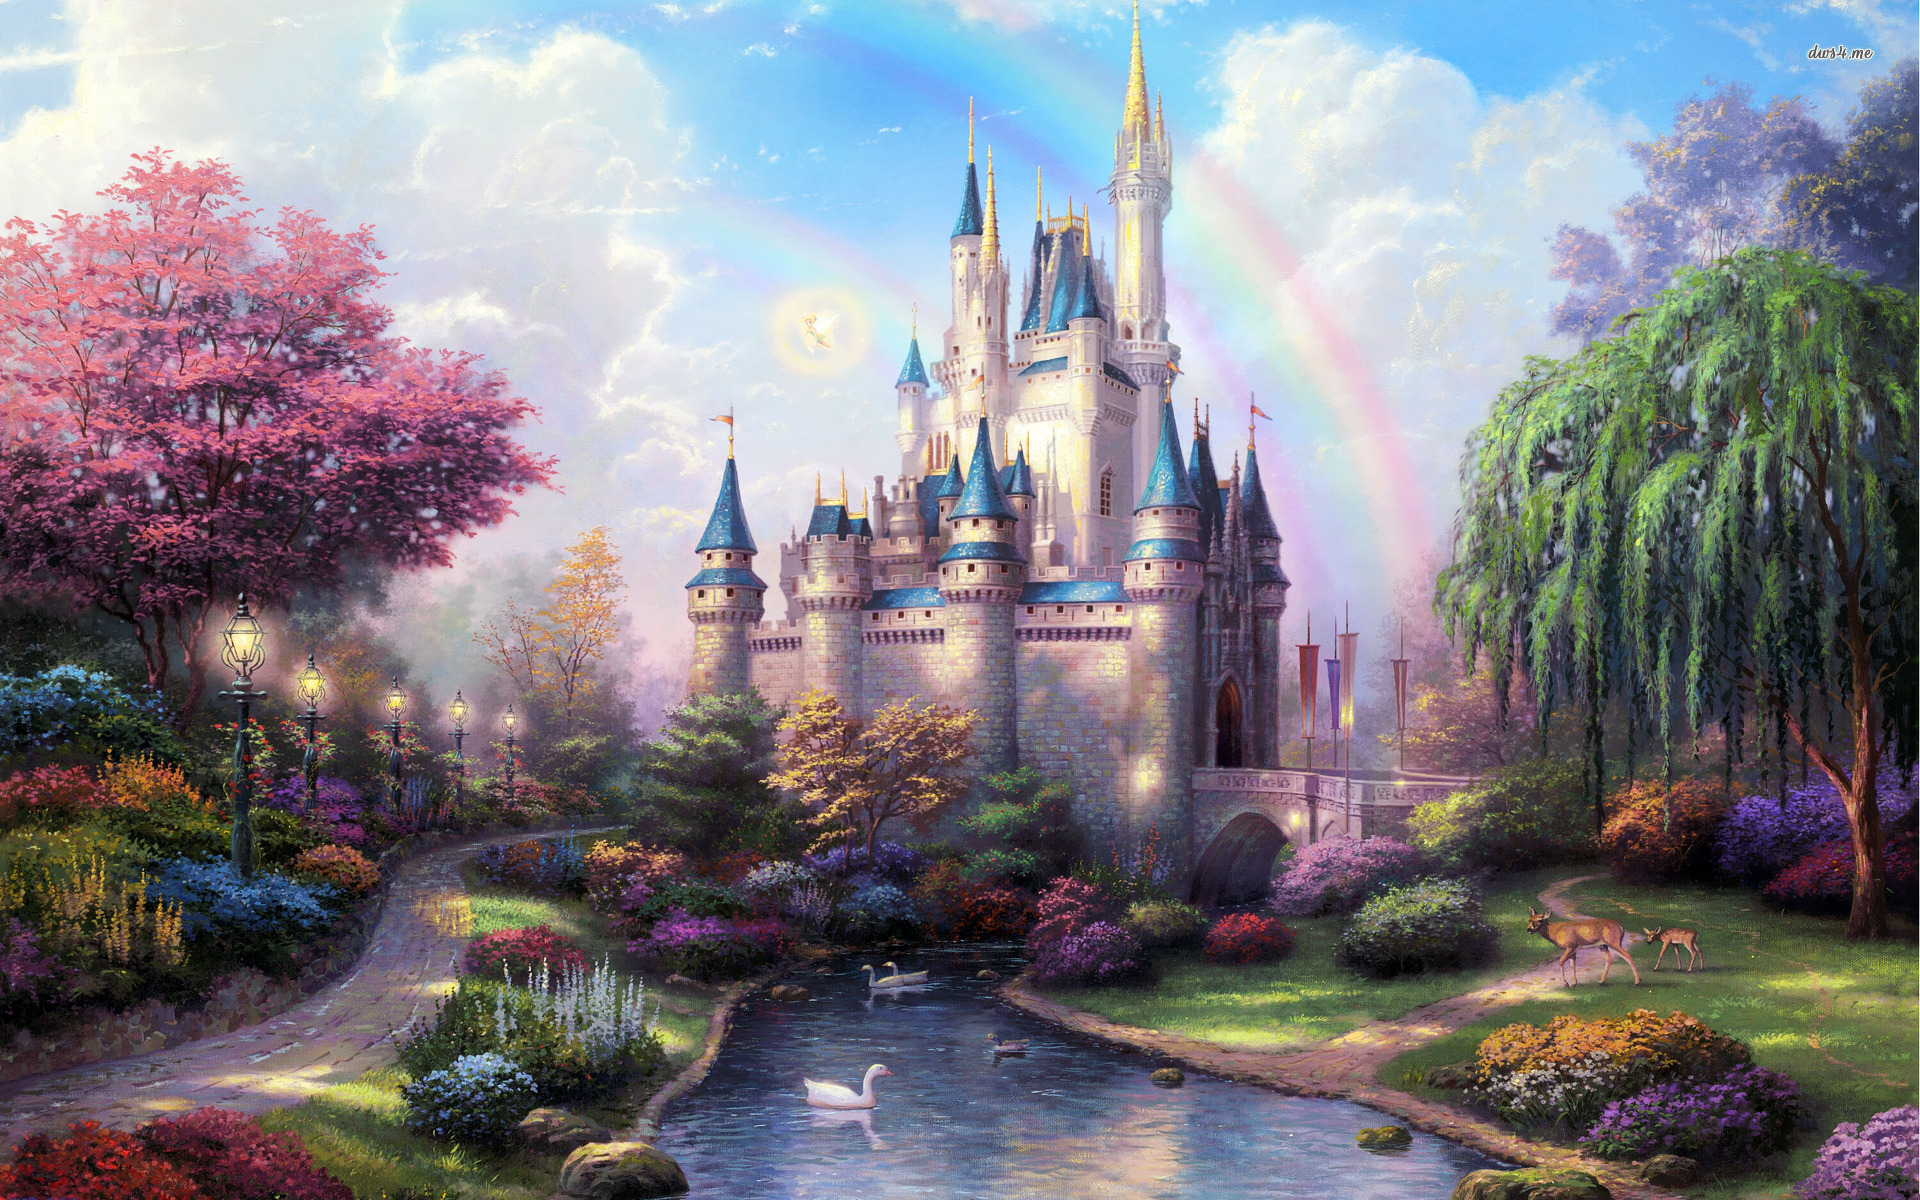 What Role Would You Play In A Fairytale? | Playbuzz